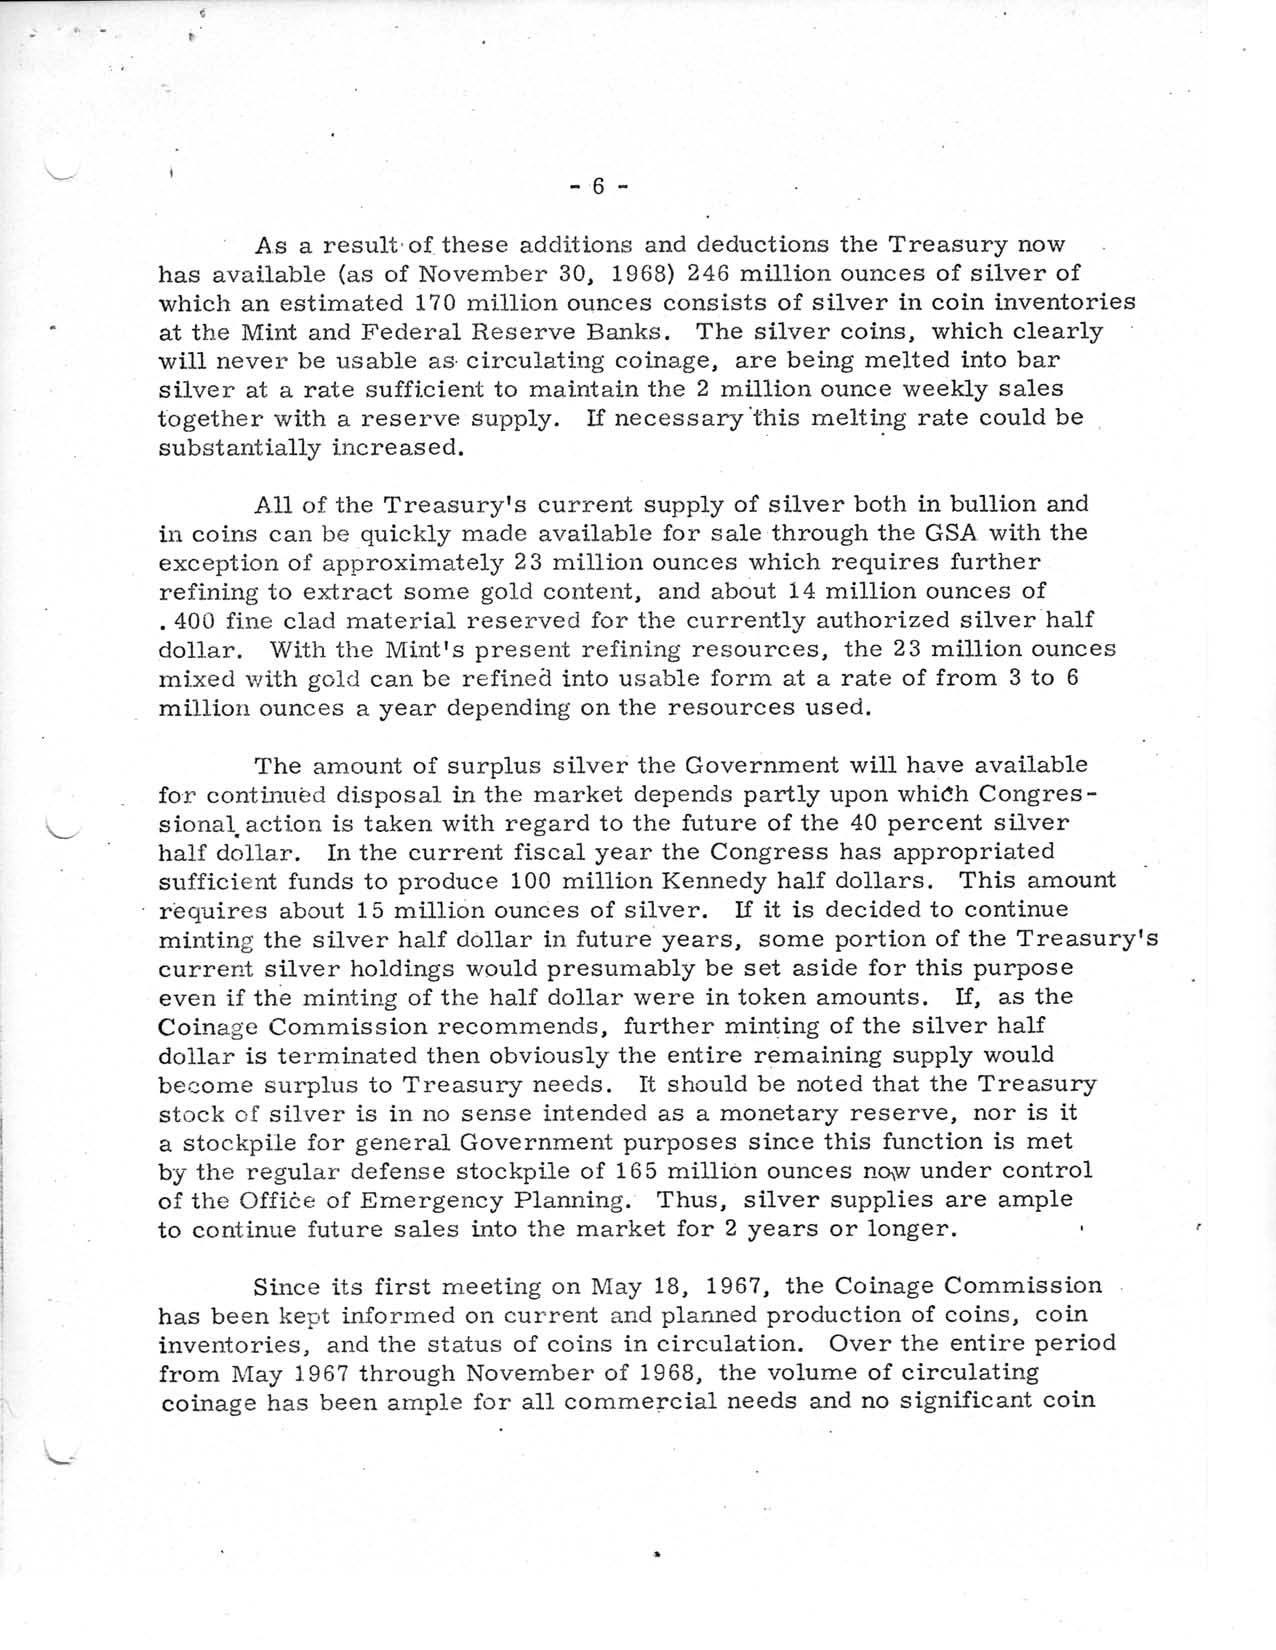 Historic Press Release: Letter to  President From Treasury Secretary, Page 7